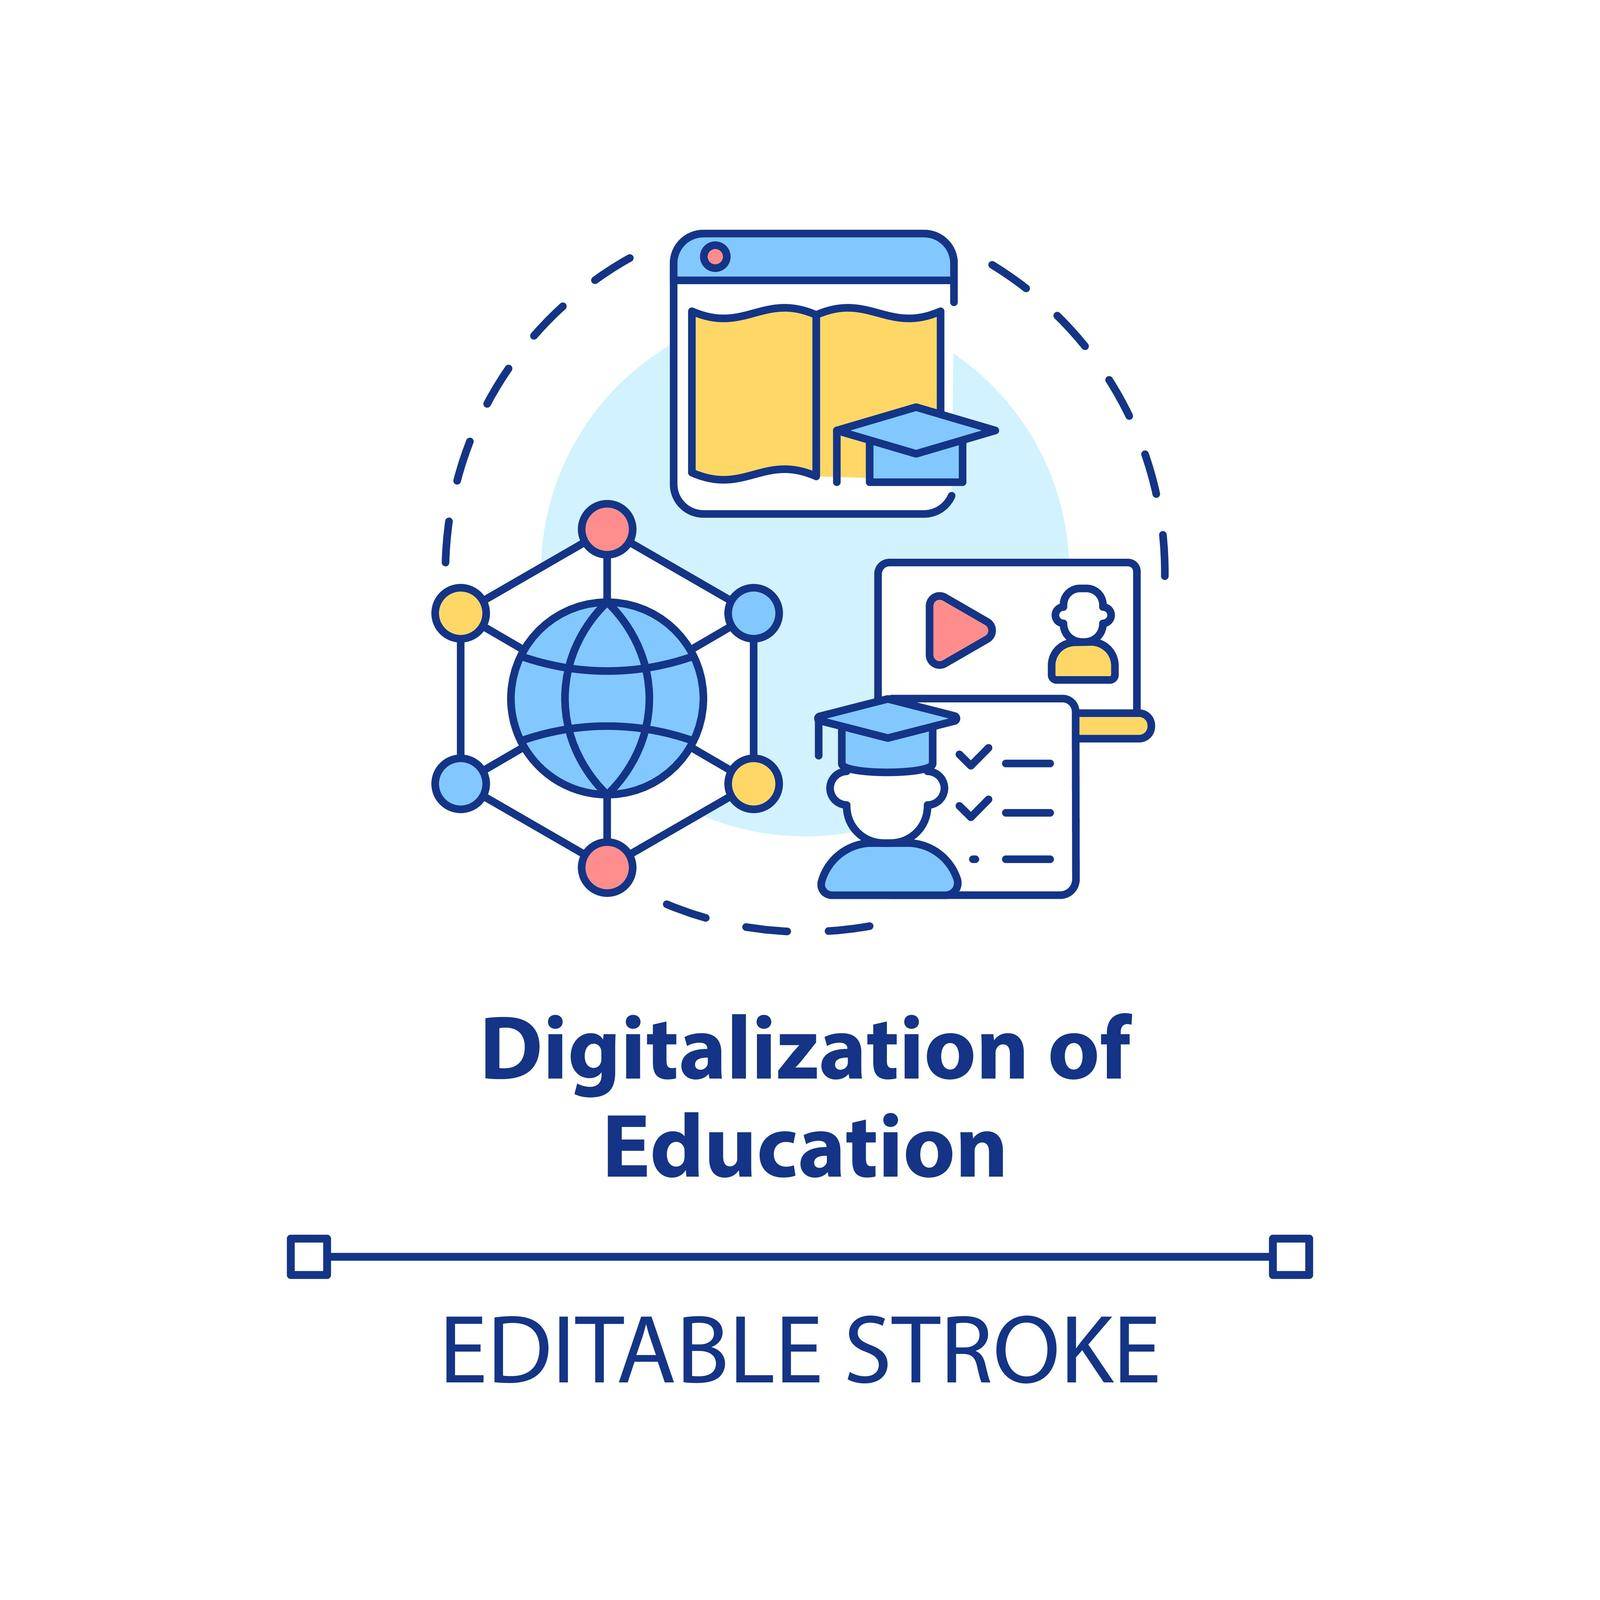 Digitalization of education concept icon by bsd